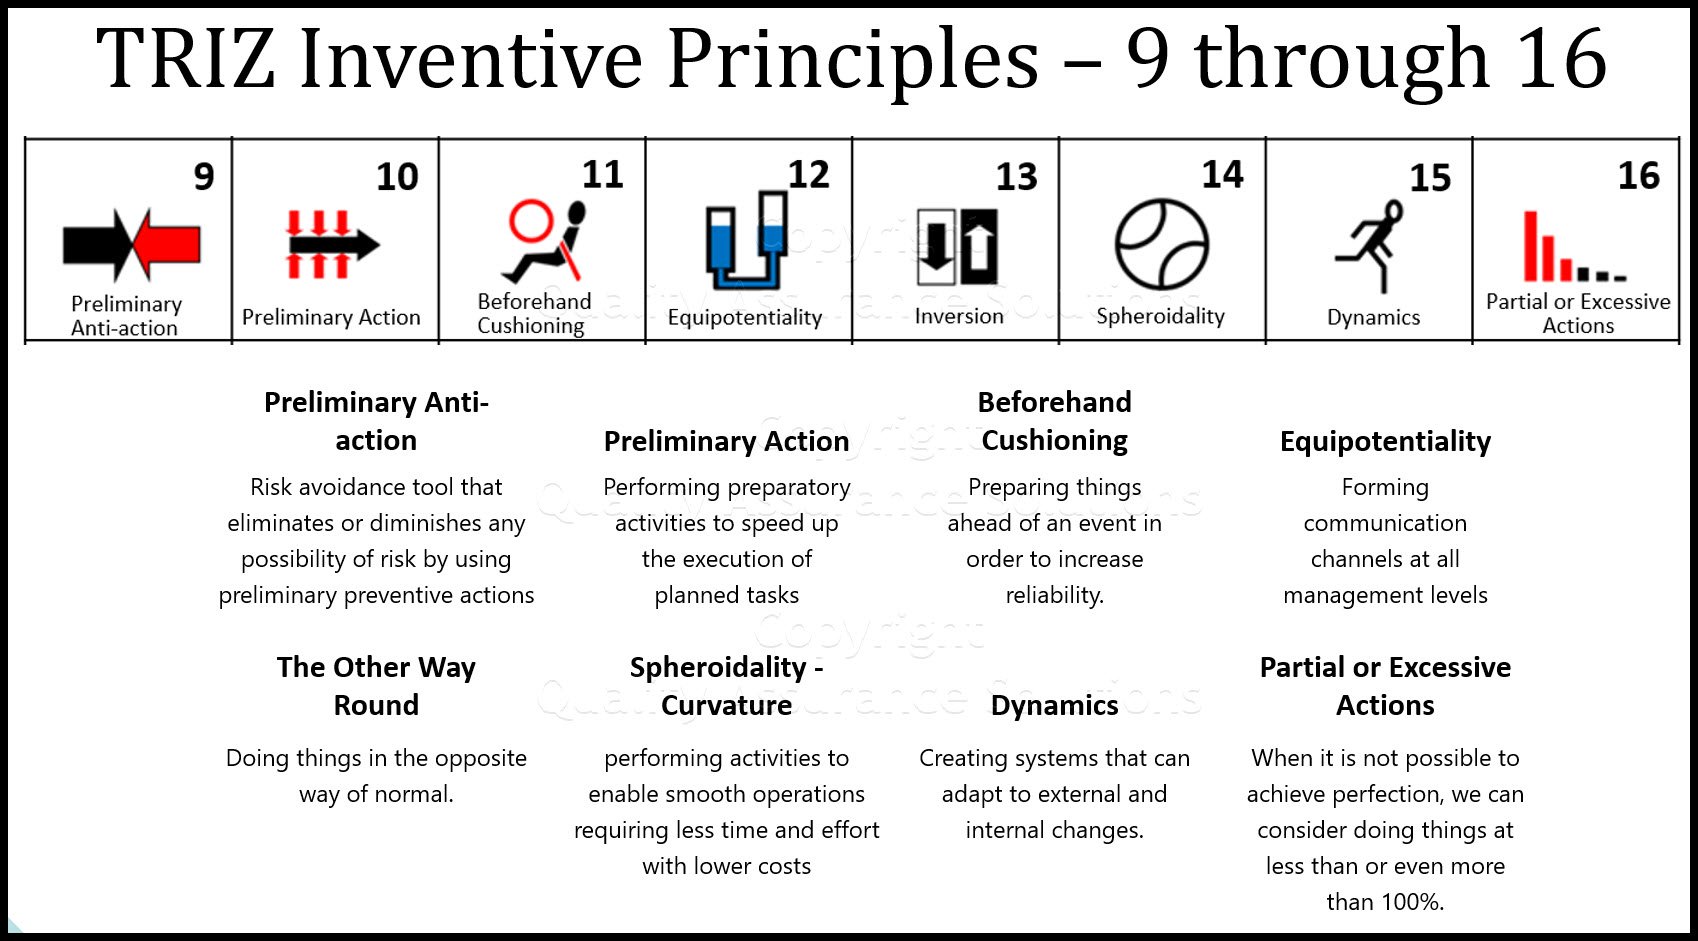 This list of TRIZ Inventive Principles includes iPreliminary Action, Equipotentiality, Beforehand Cushioning